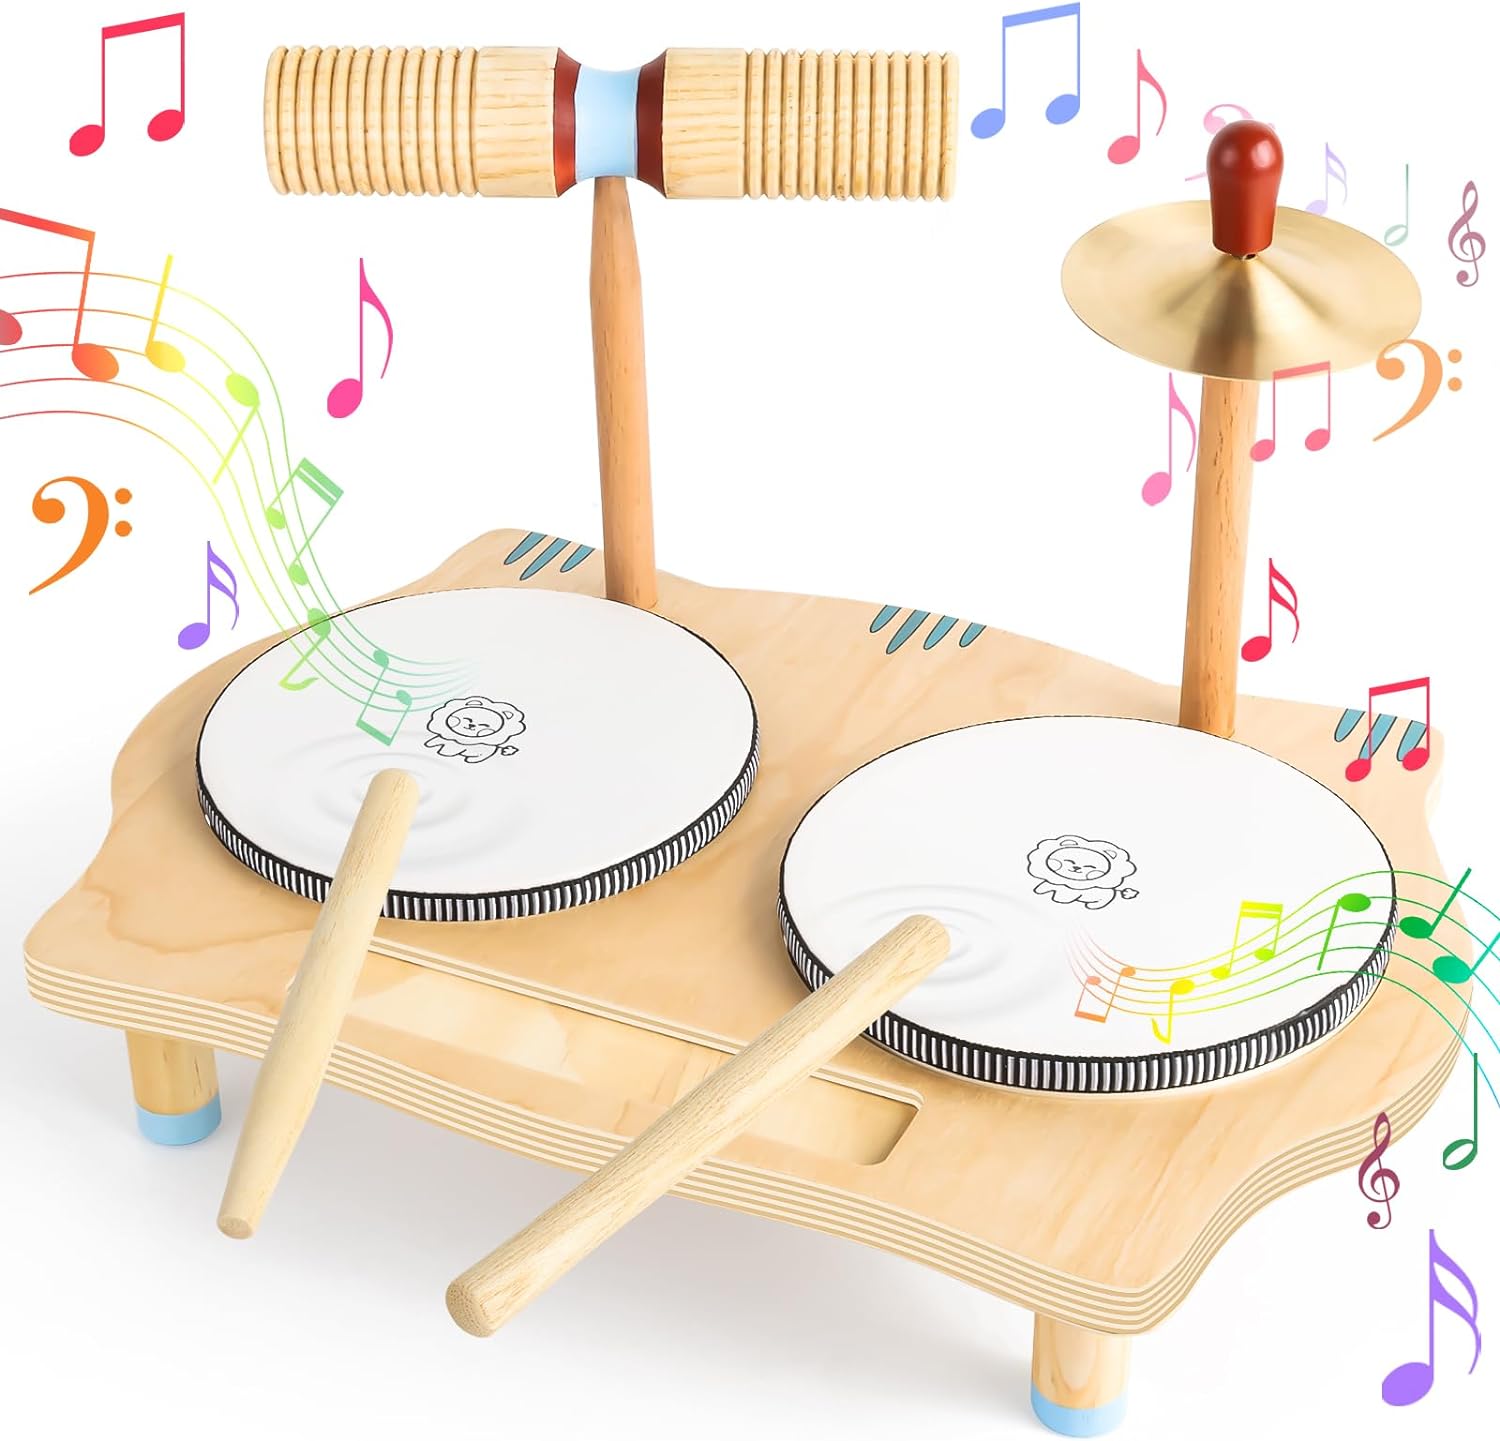 INLAIER Kids Drum Set, Kids Musical Instruments, All in One Wooden Musical Table Top Drum Kit Play Set, Educational Percussion Drum Sensory Toys Birthday Gifts for Children Boys and Girls.